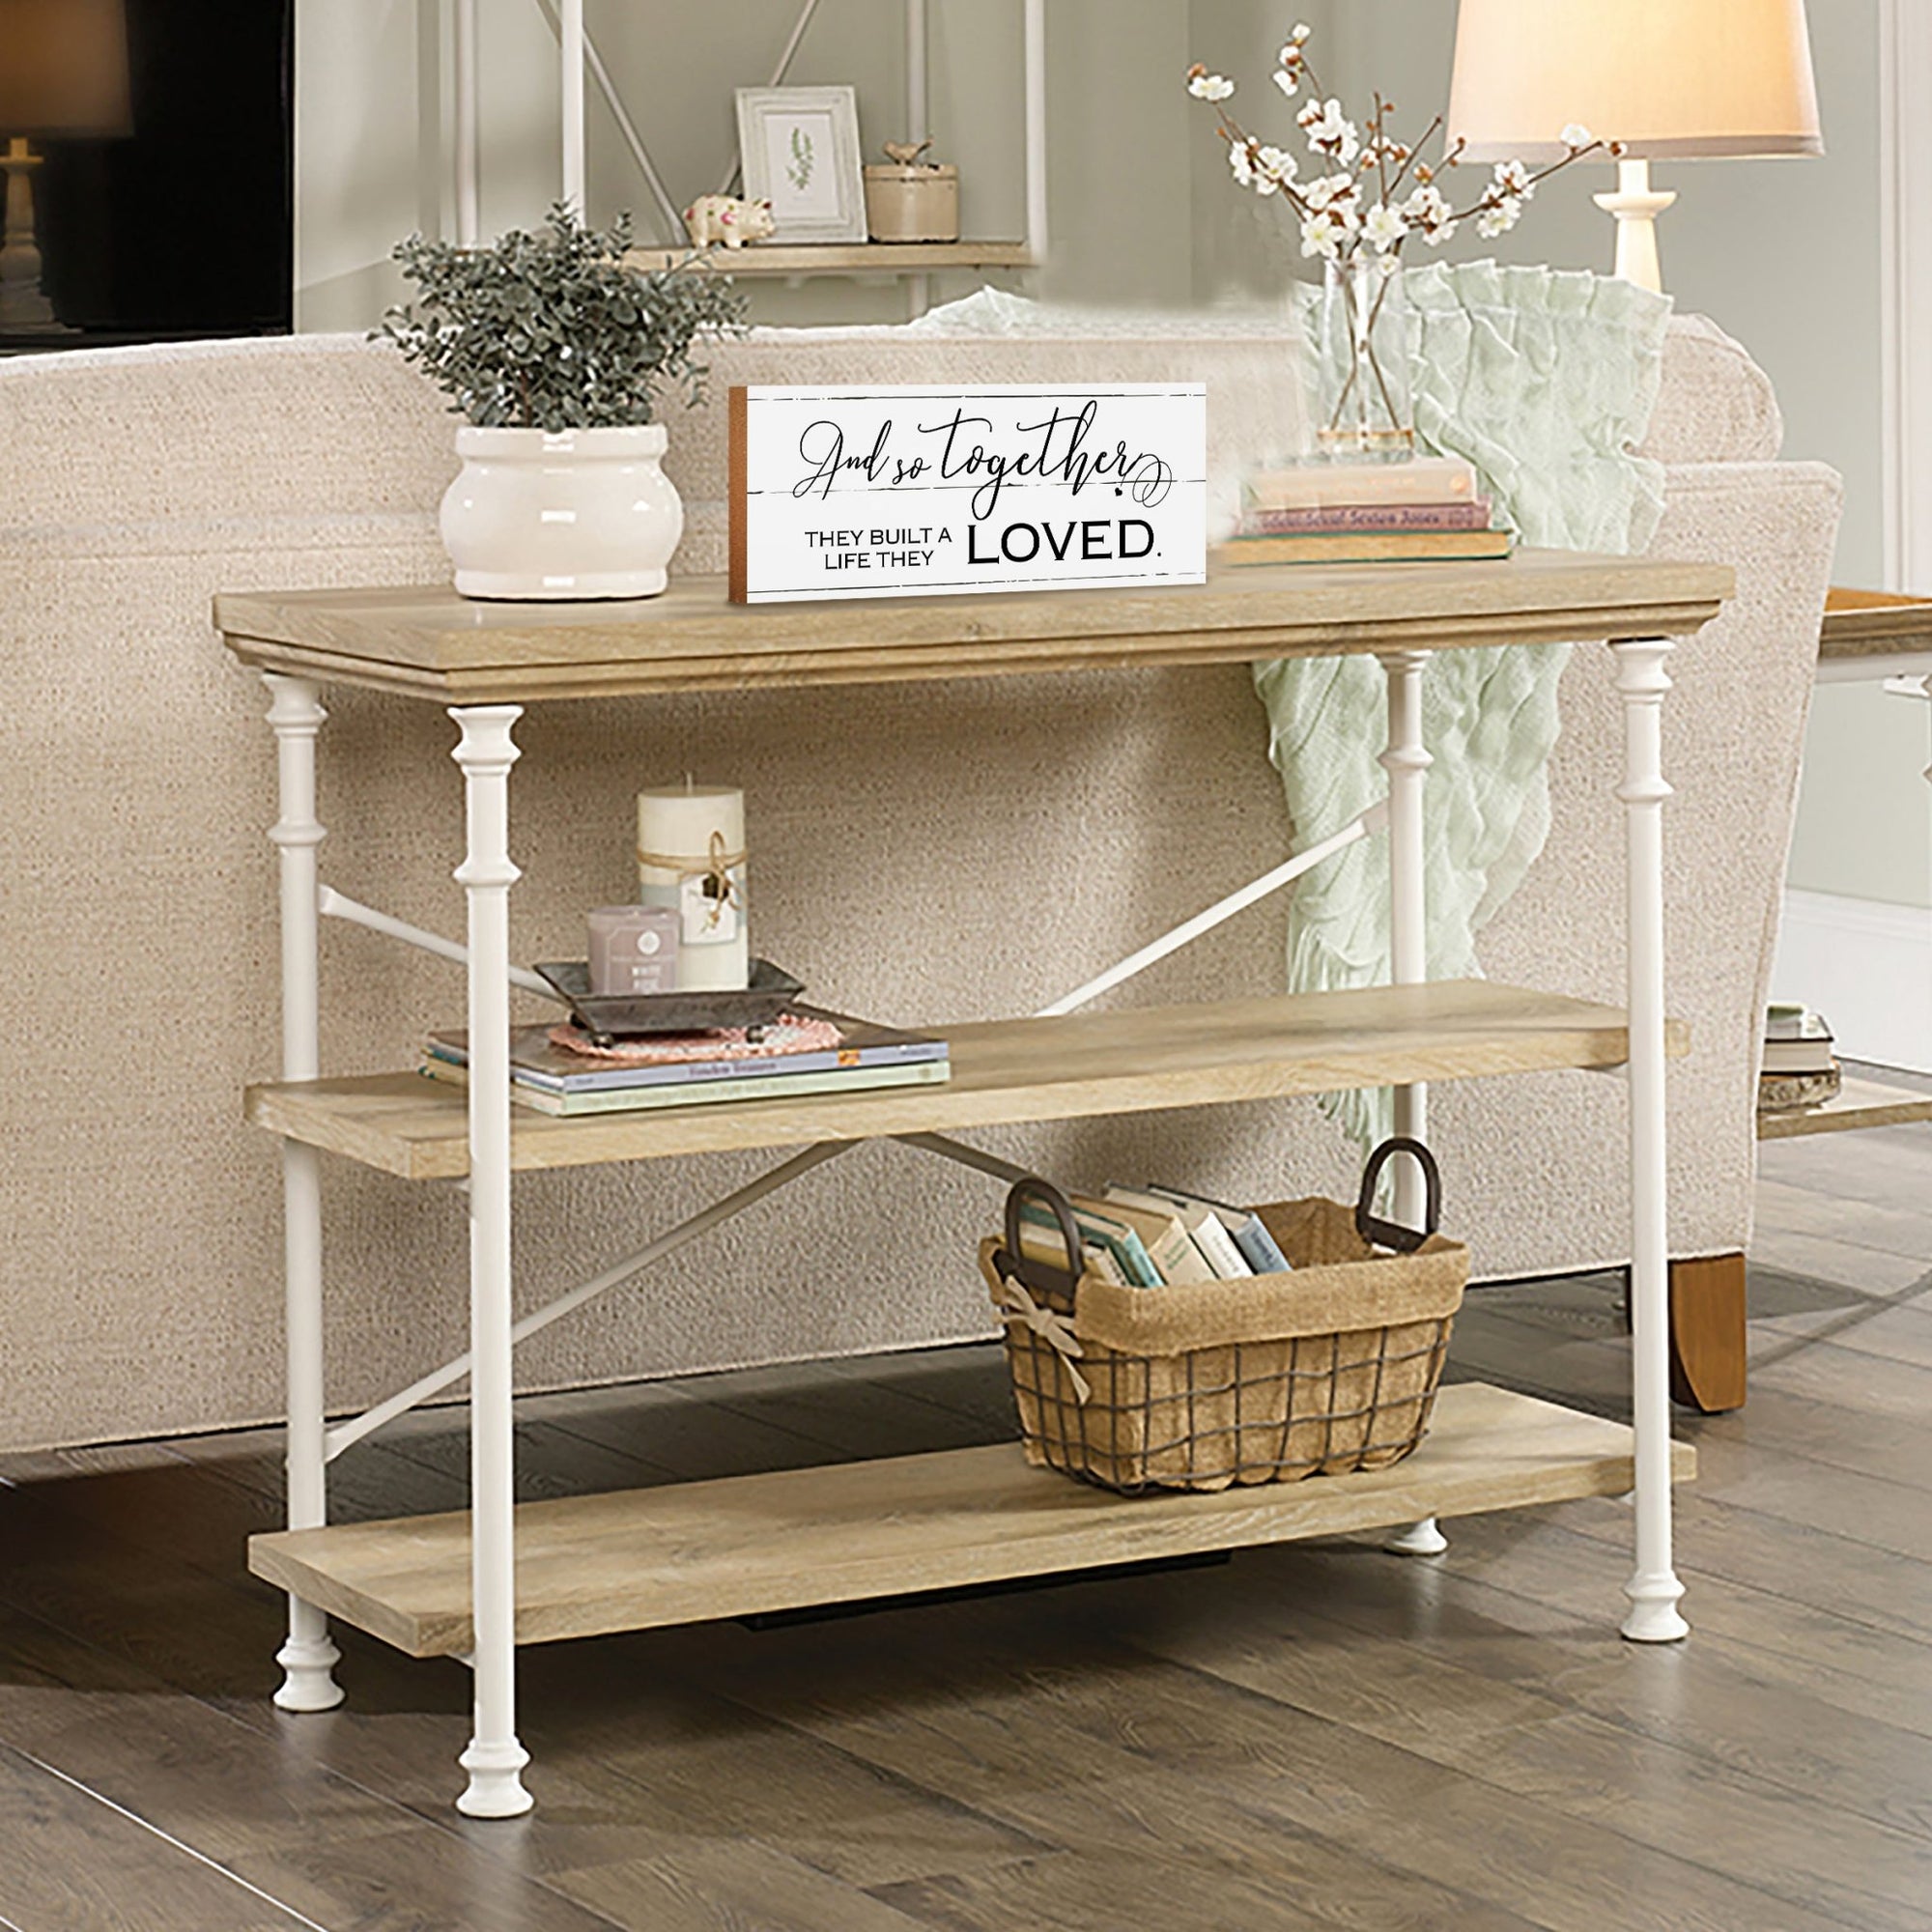 Home And Family Tabletop, Countertop, And Shelf Décor And Gift Ideas - And So together - LifeSong Milestones